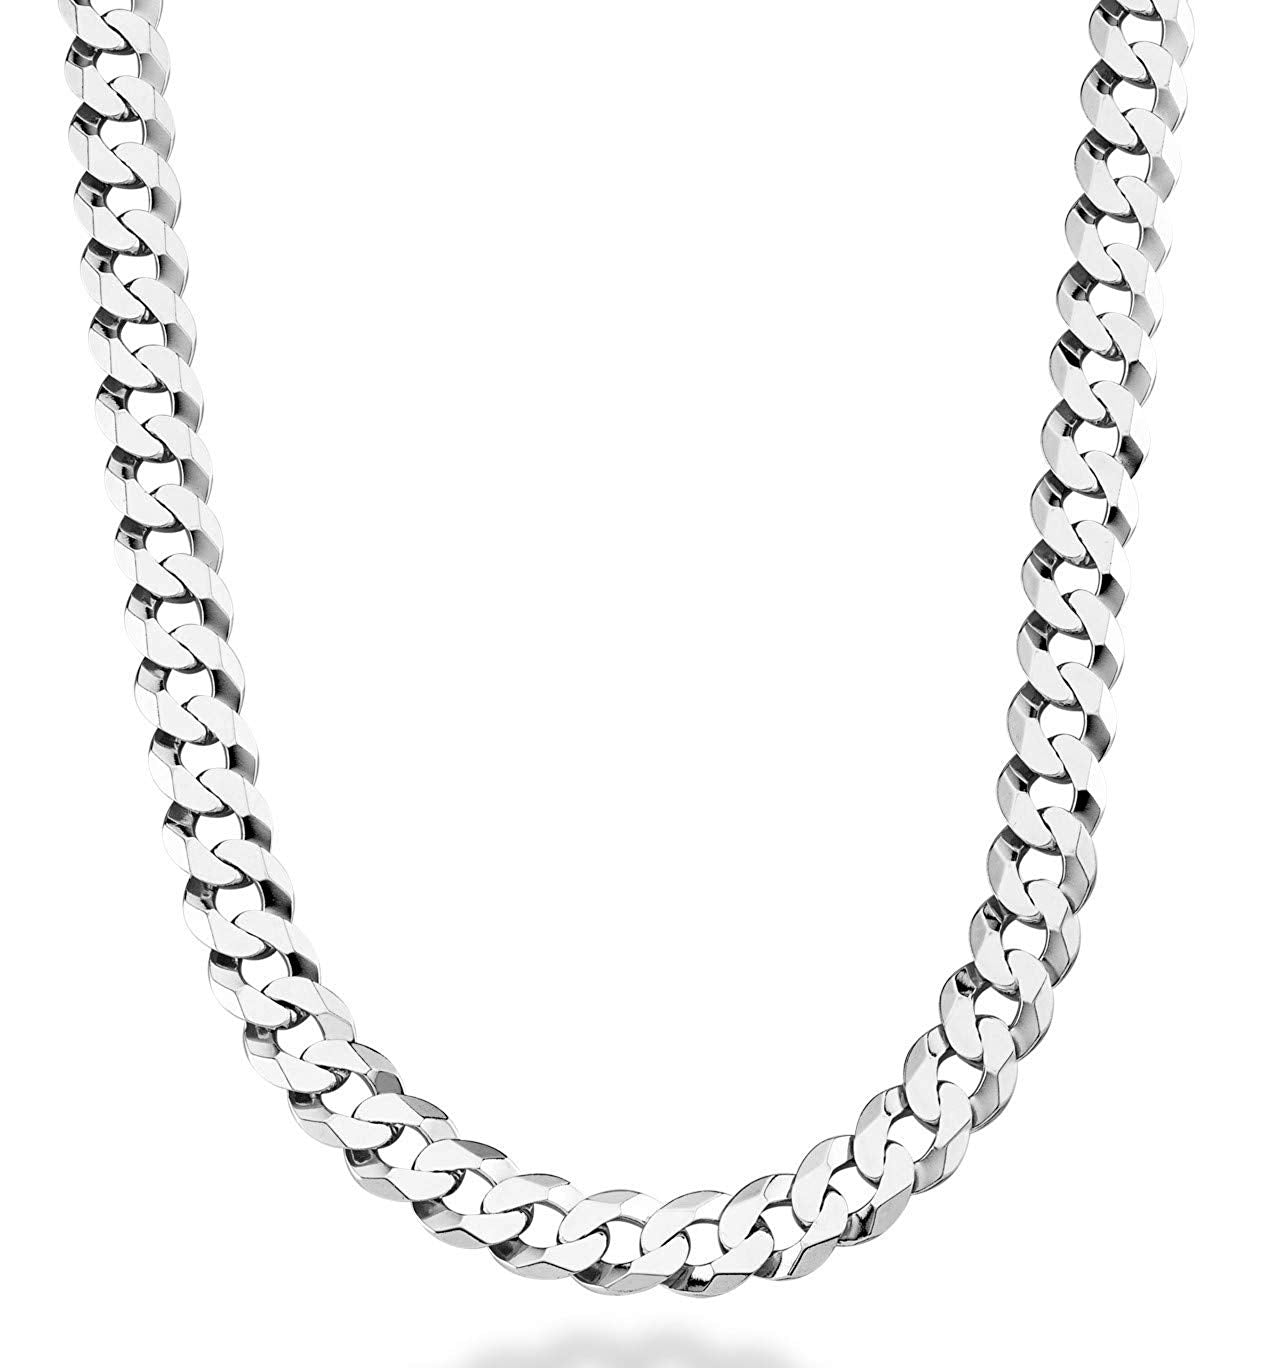 Sterling Silver Rhodium Plated Curb Chain Necklace, 11.5mm, 24" fine designer jewelry for men and women